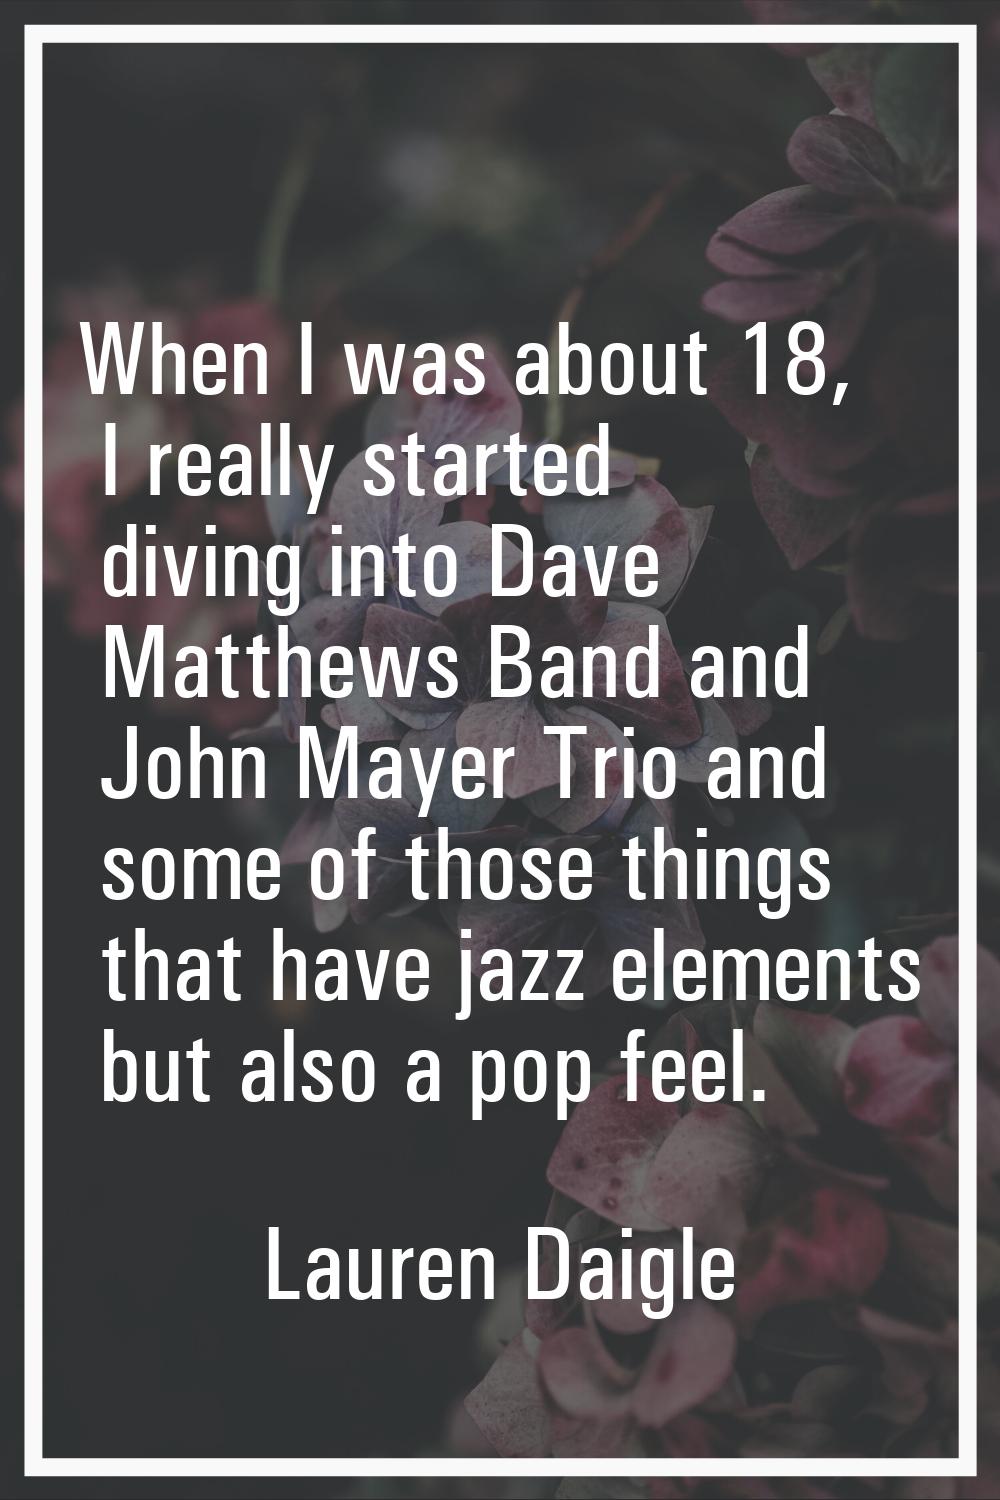 When I was about 18, I really started diving into Dave Matthews Band and John Mayer Trio and some o